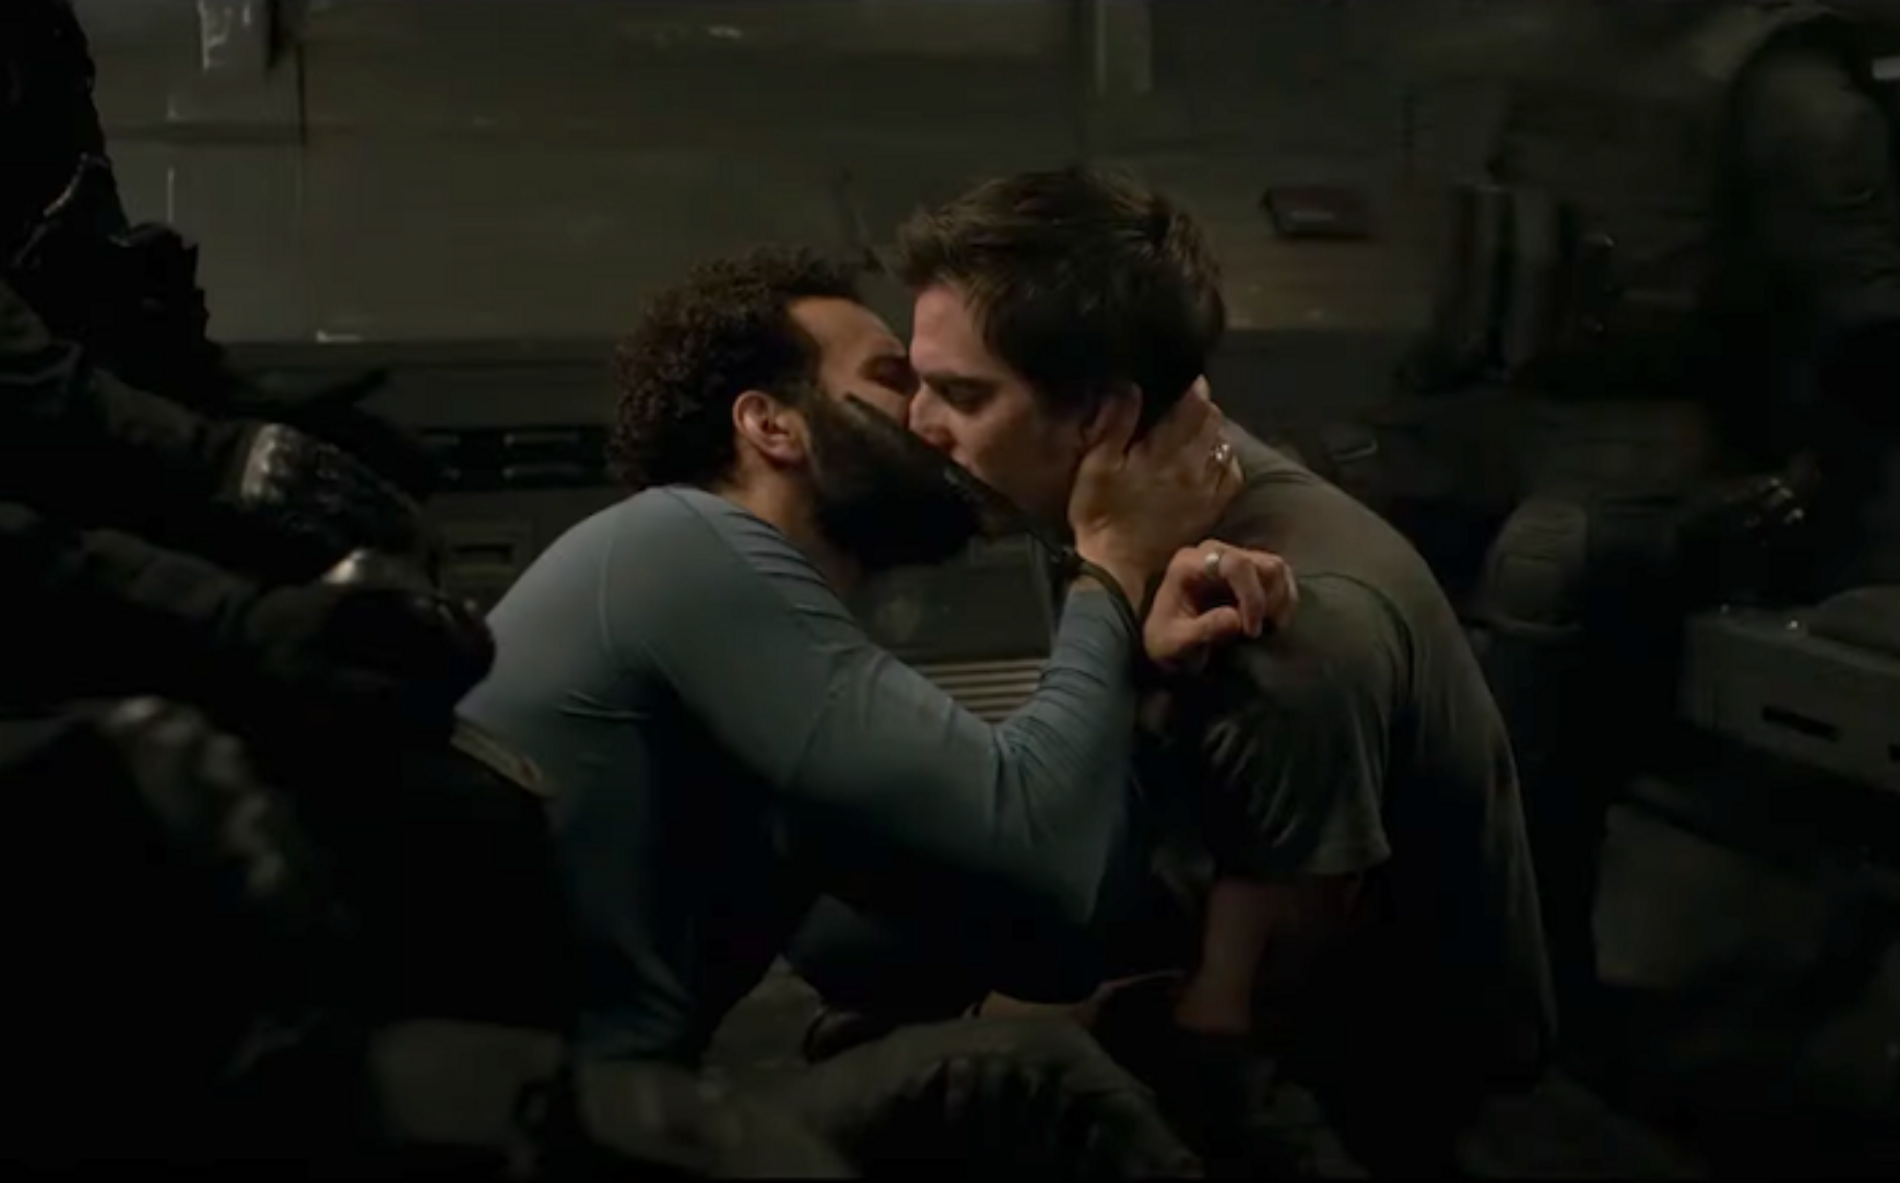 This Scene From The Upcoming Netflix’s ‘The Old Guard’ Is One Of The Most Passionate Queer Movie Moments Of 2020